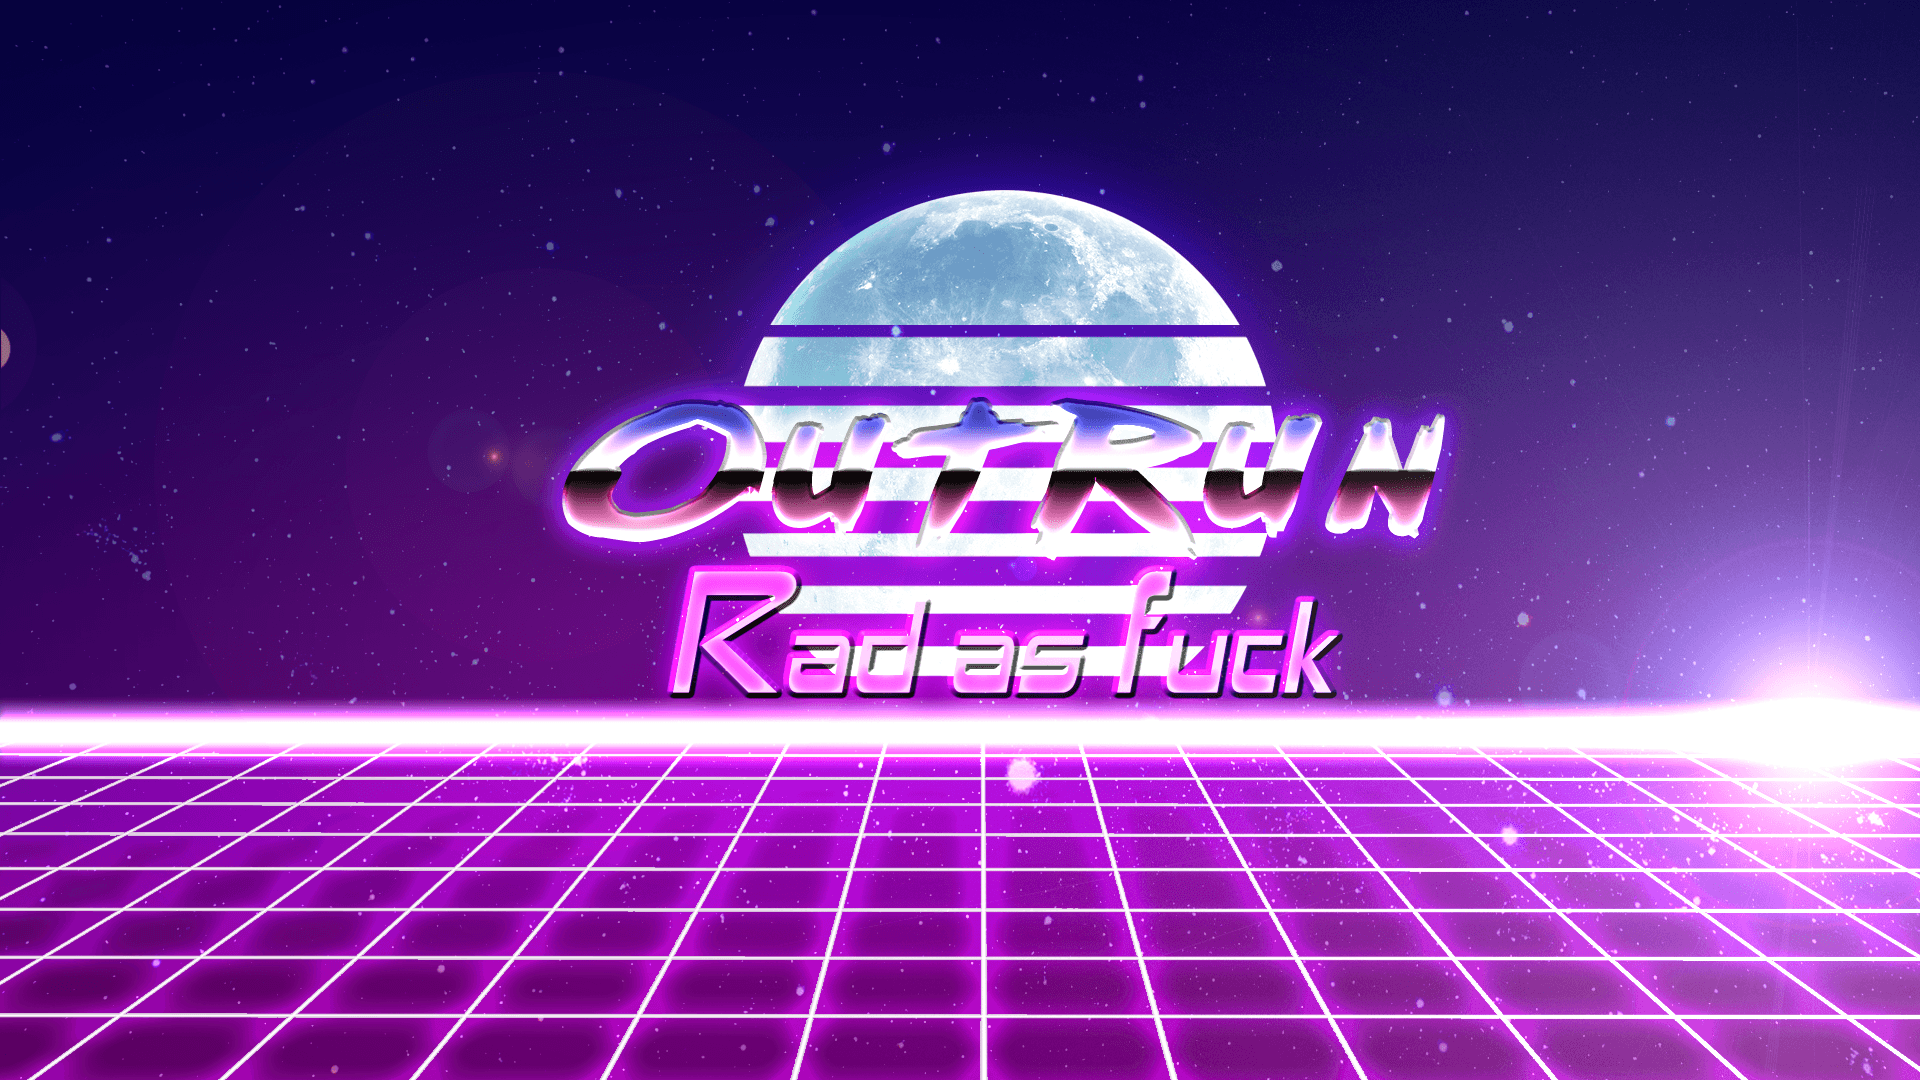 I tried my hand at creating an outrun wallpaper. What do you think